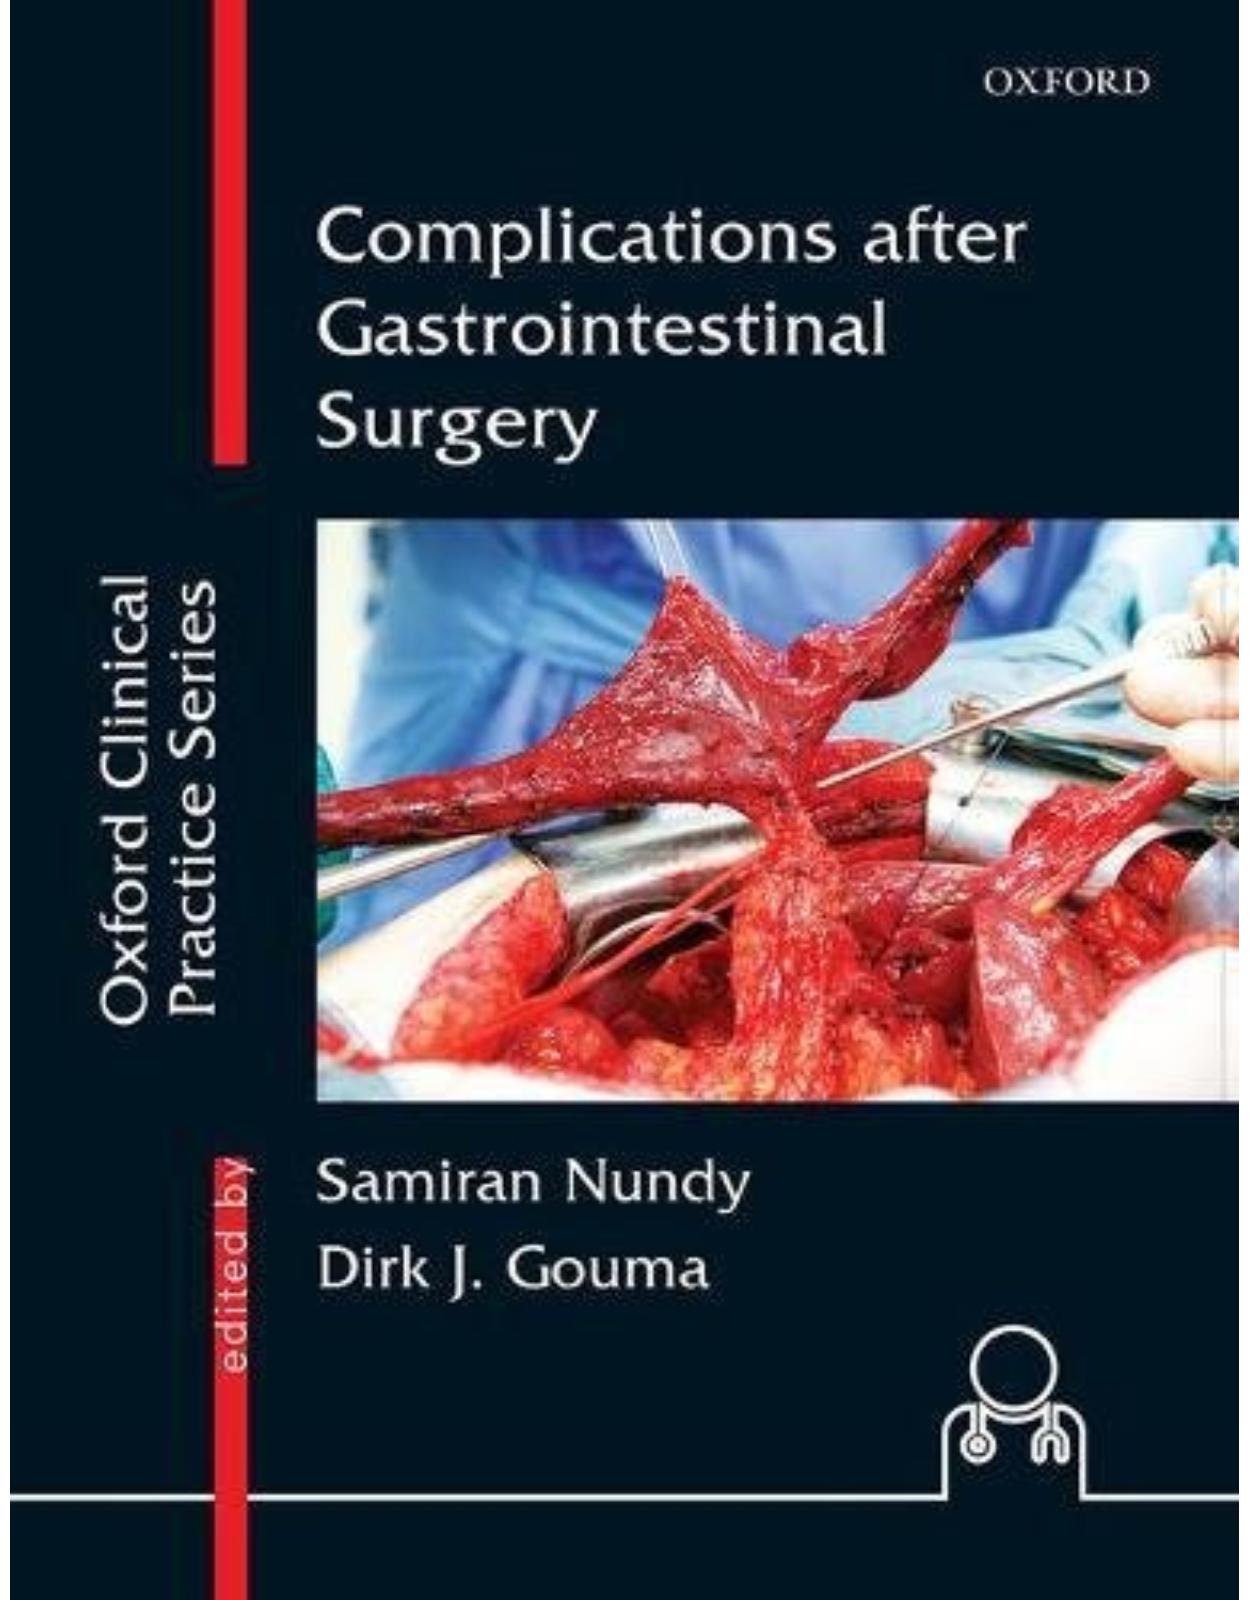 Complications after Gastrointestinal Surgery